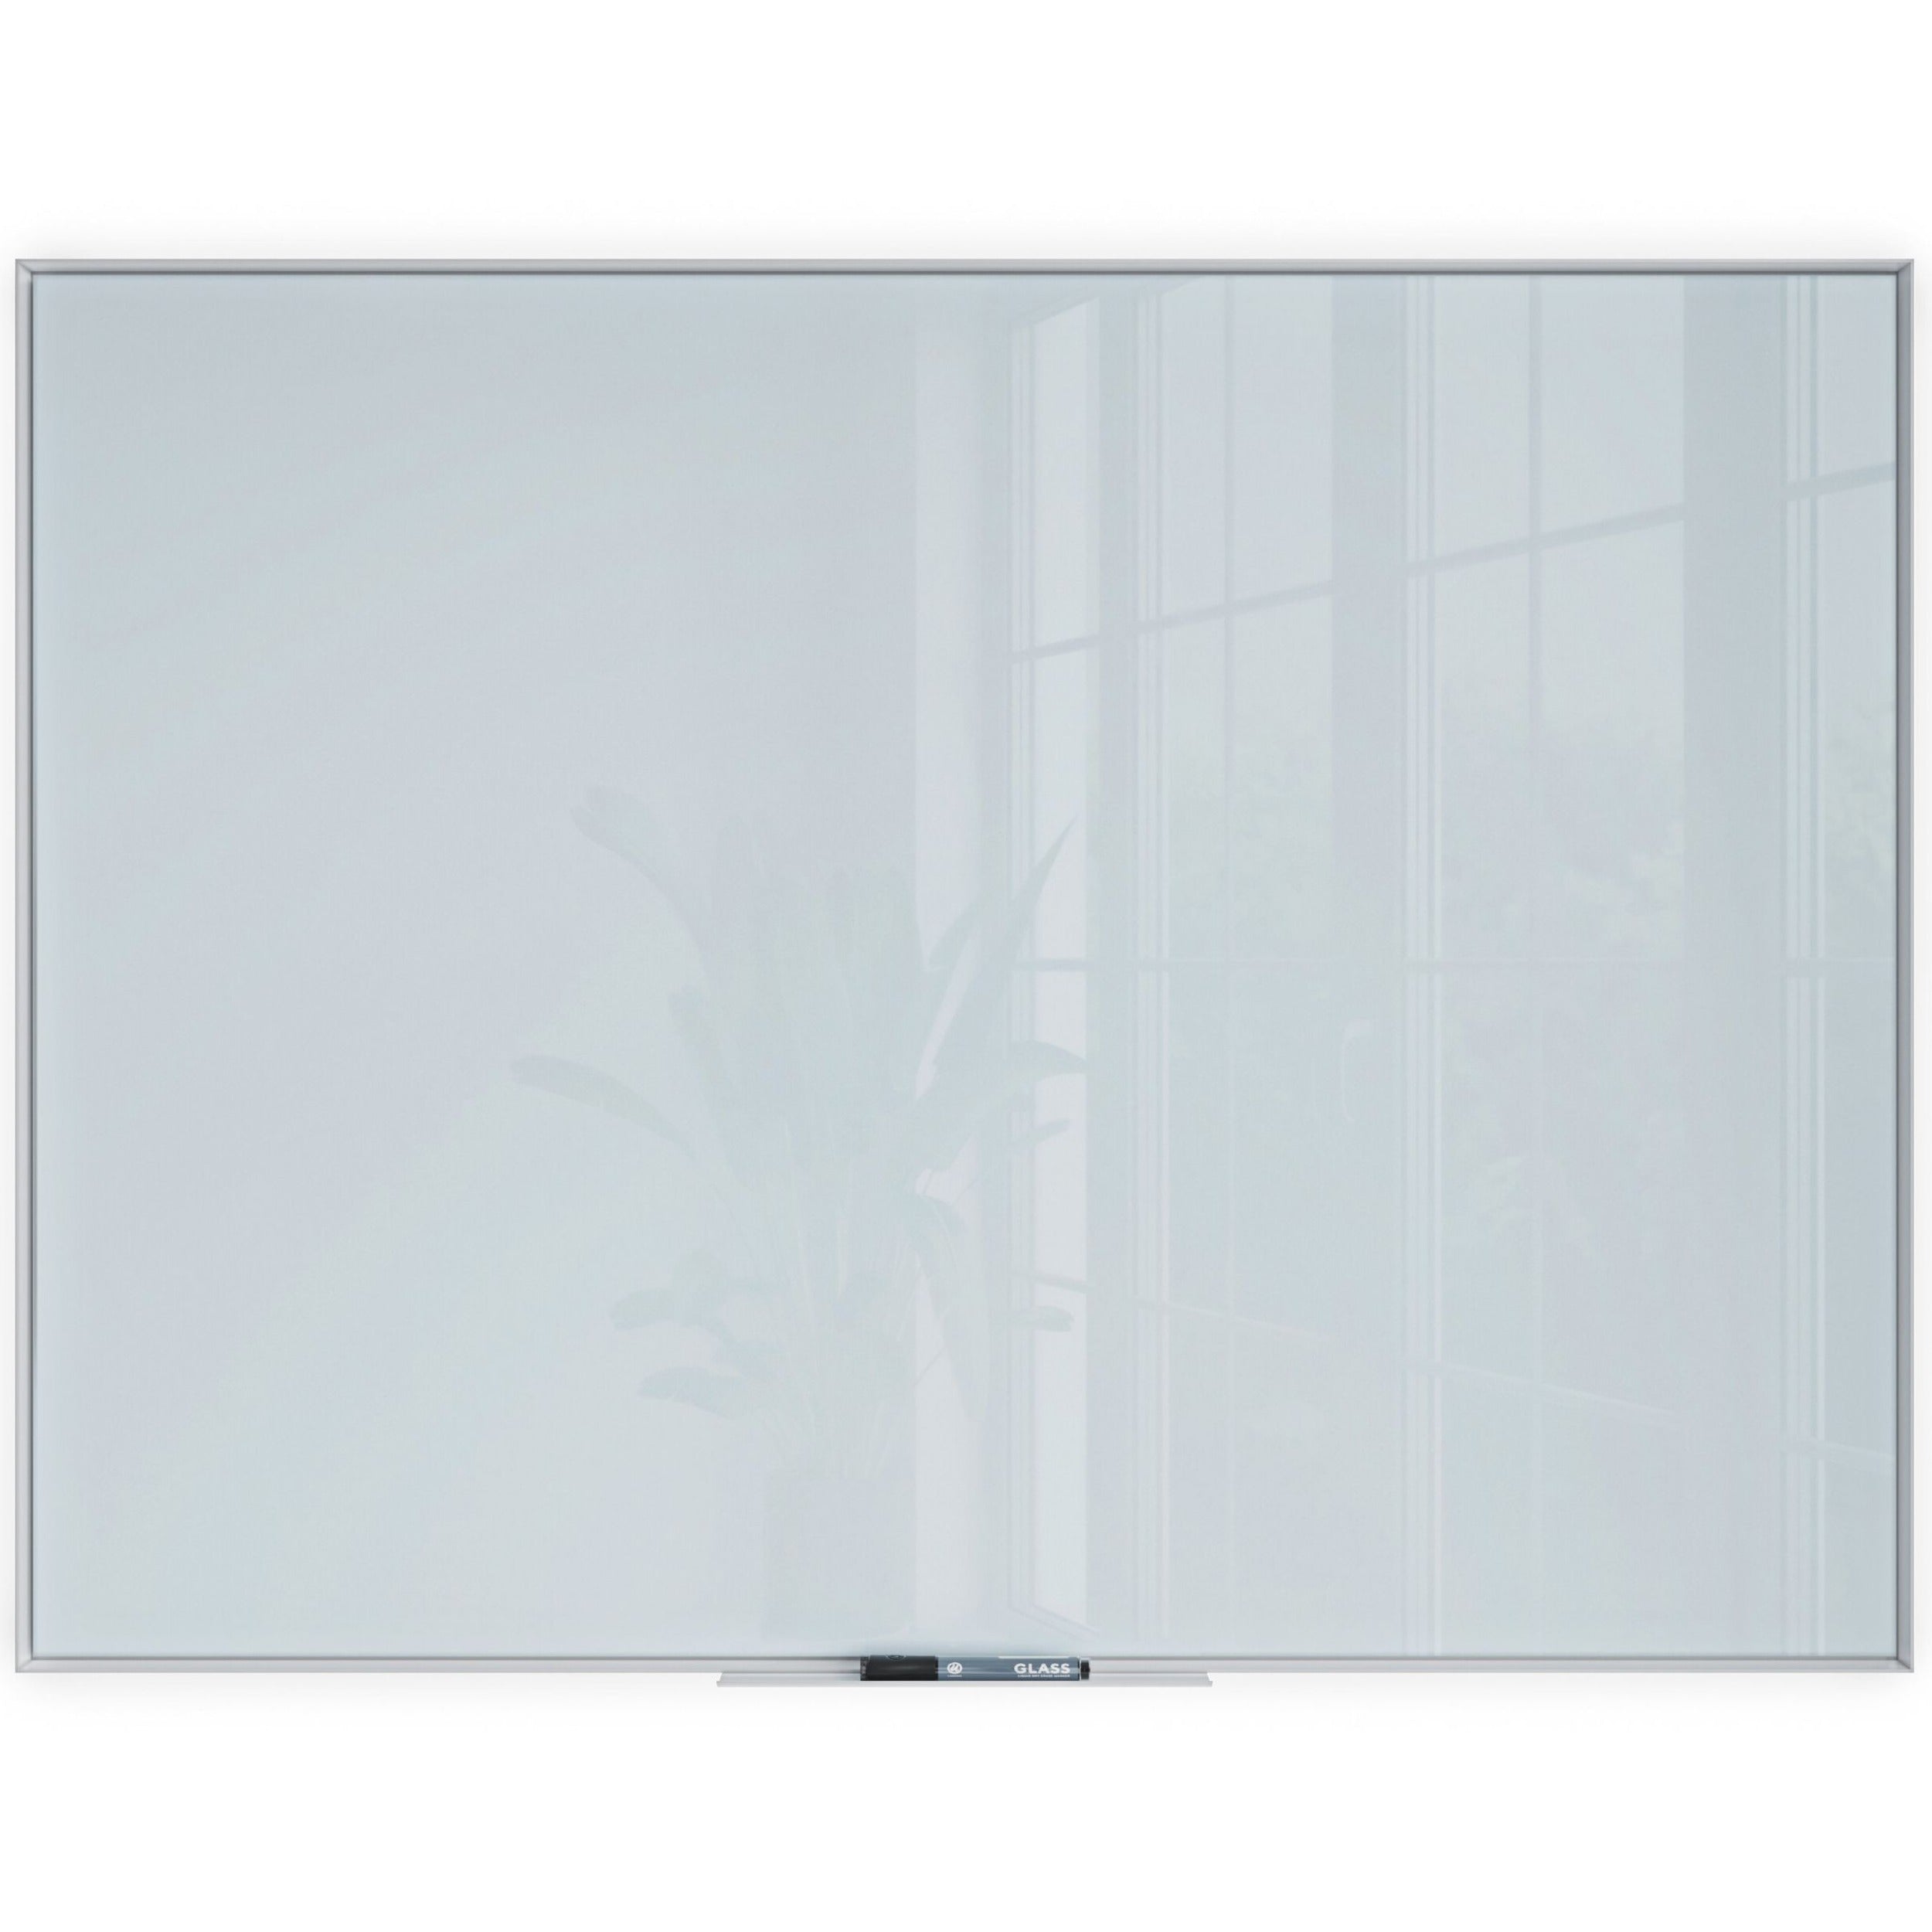 u-brands-frosted-glass-dry-erase-board-35-29-ft-width-x-47-39-ft-height-frosted-white-tempered-glass-surface-white-aluminum-frame-rectangle-horizontal-vertical-1-each_ubr2826u0001 - 1